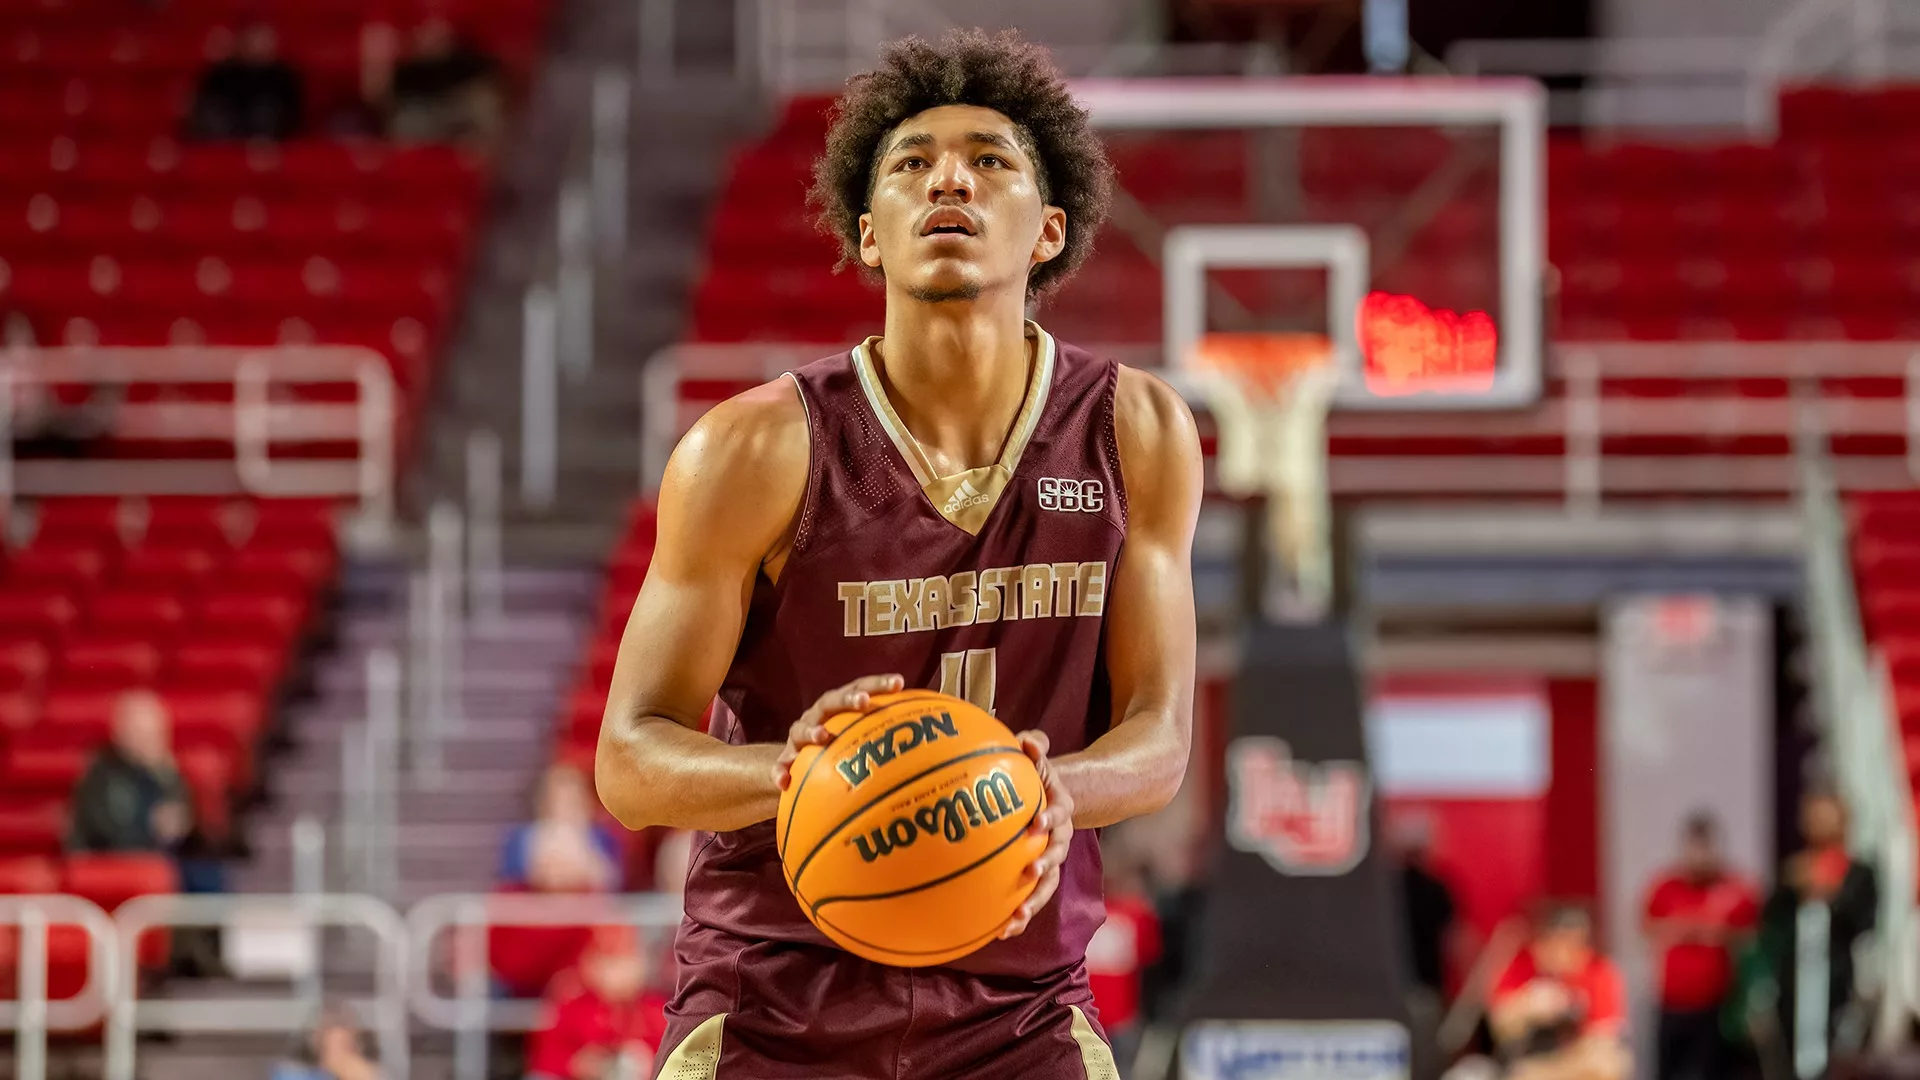 REPORT: Salukis receive commitment from 6’6 forward Davion Sykes